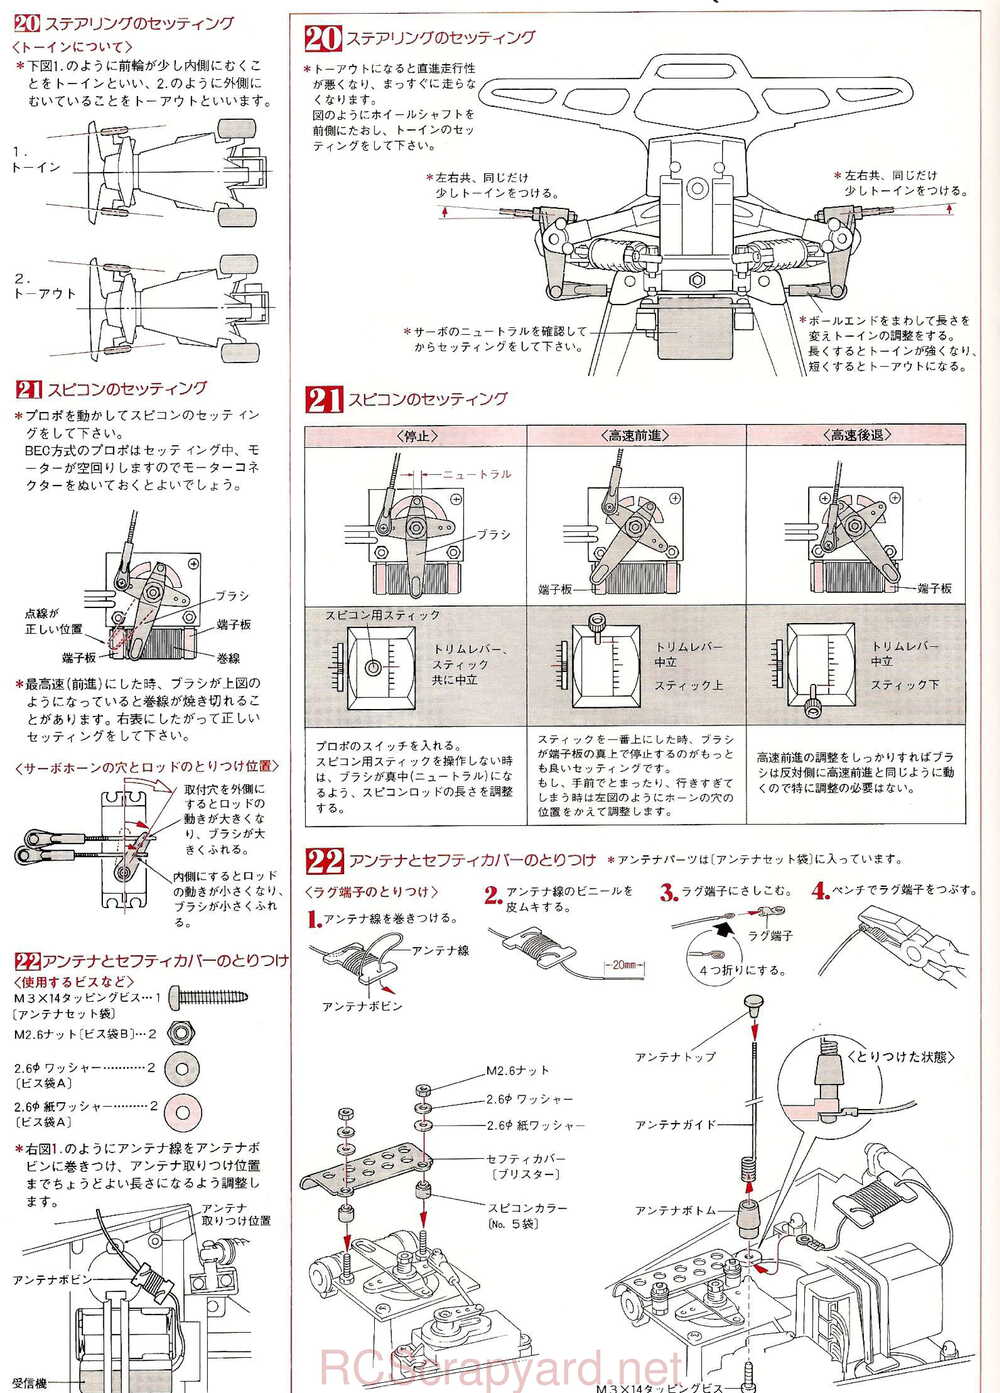 Kyosho - 3084 - Cosmo - Manual - Page 10